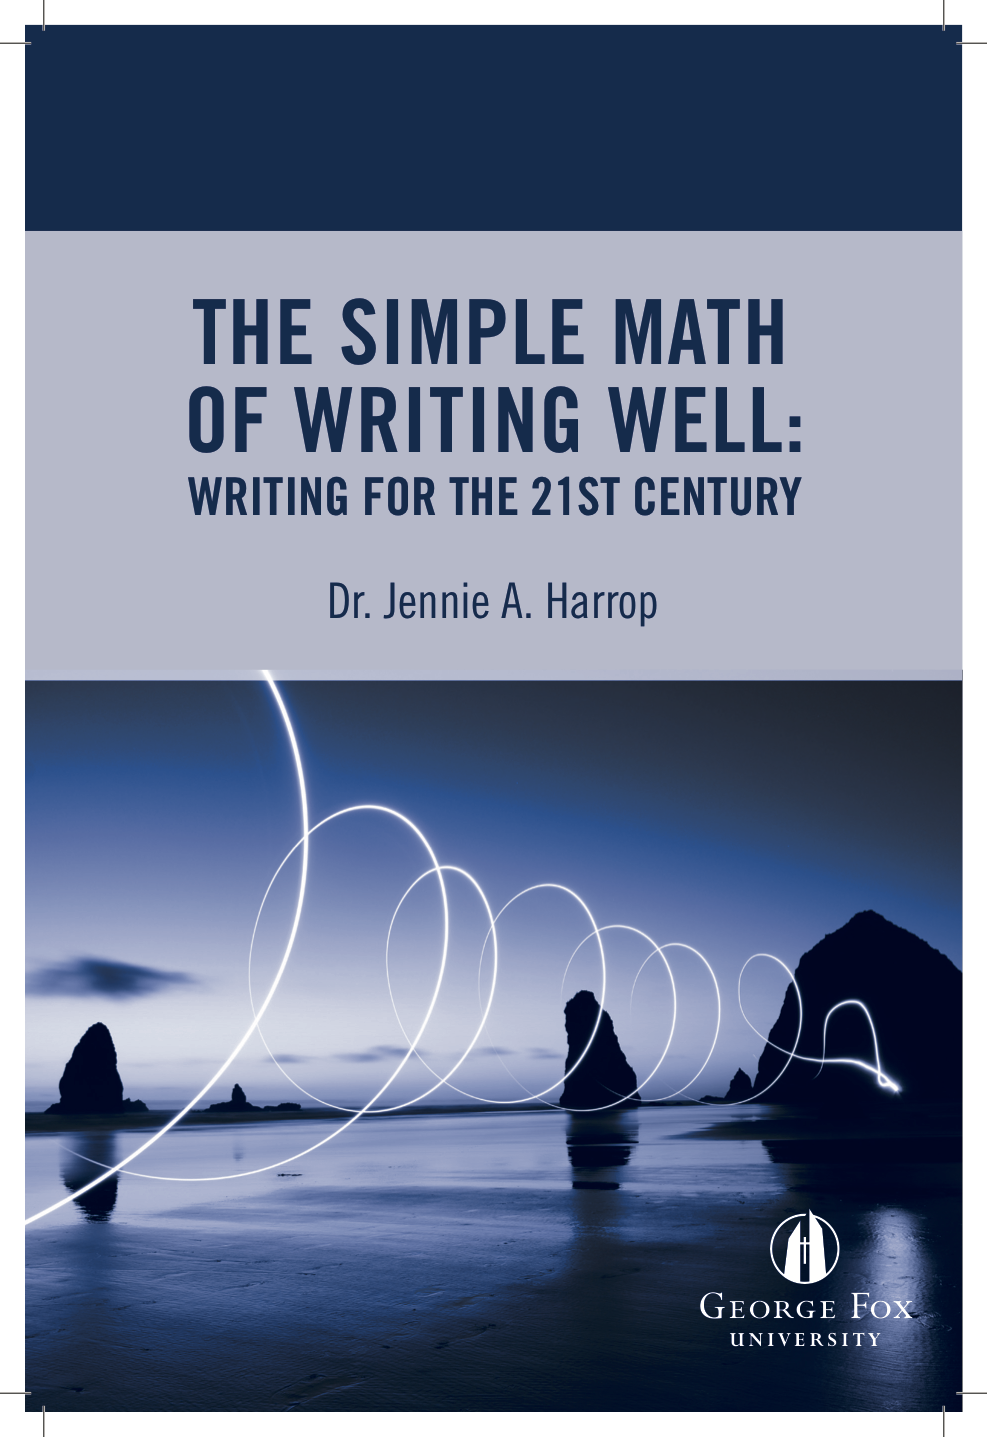 Writing for the 21st Century